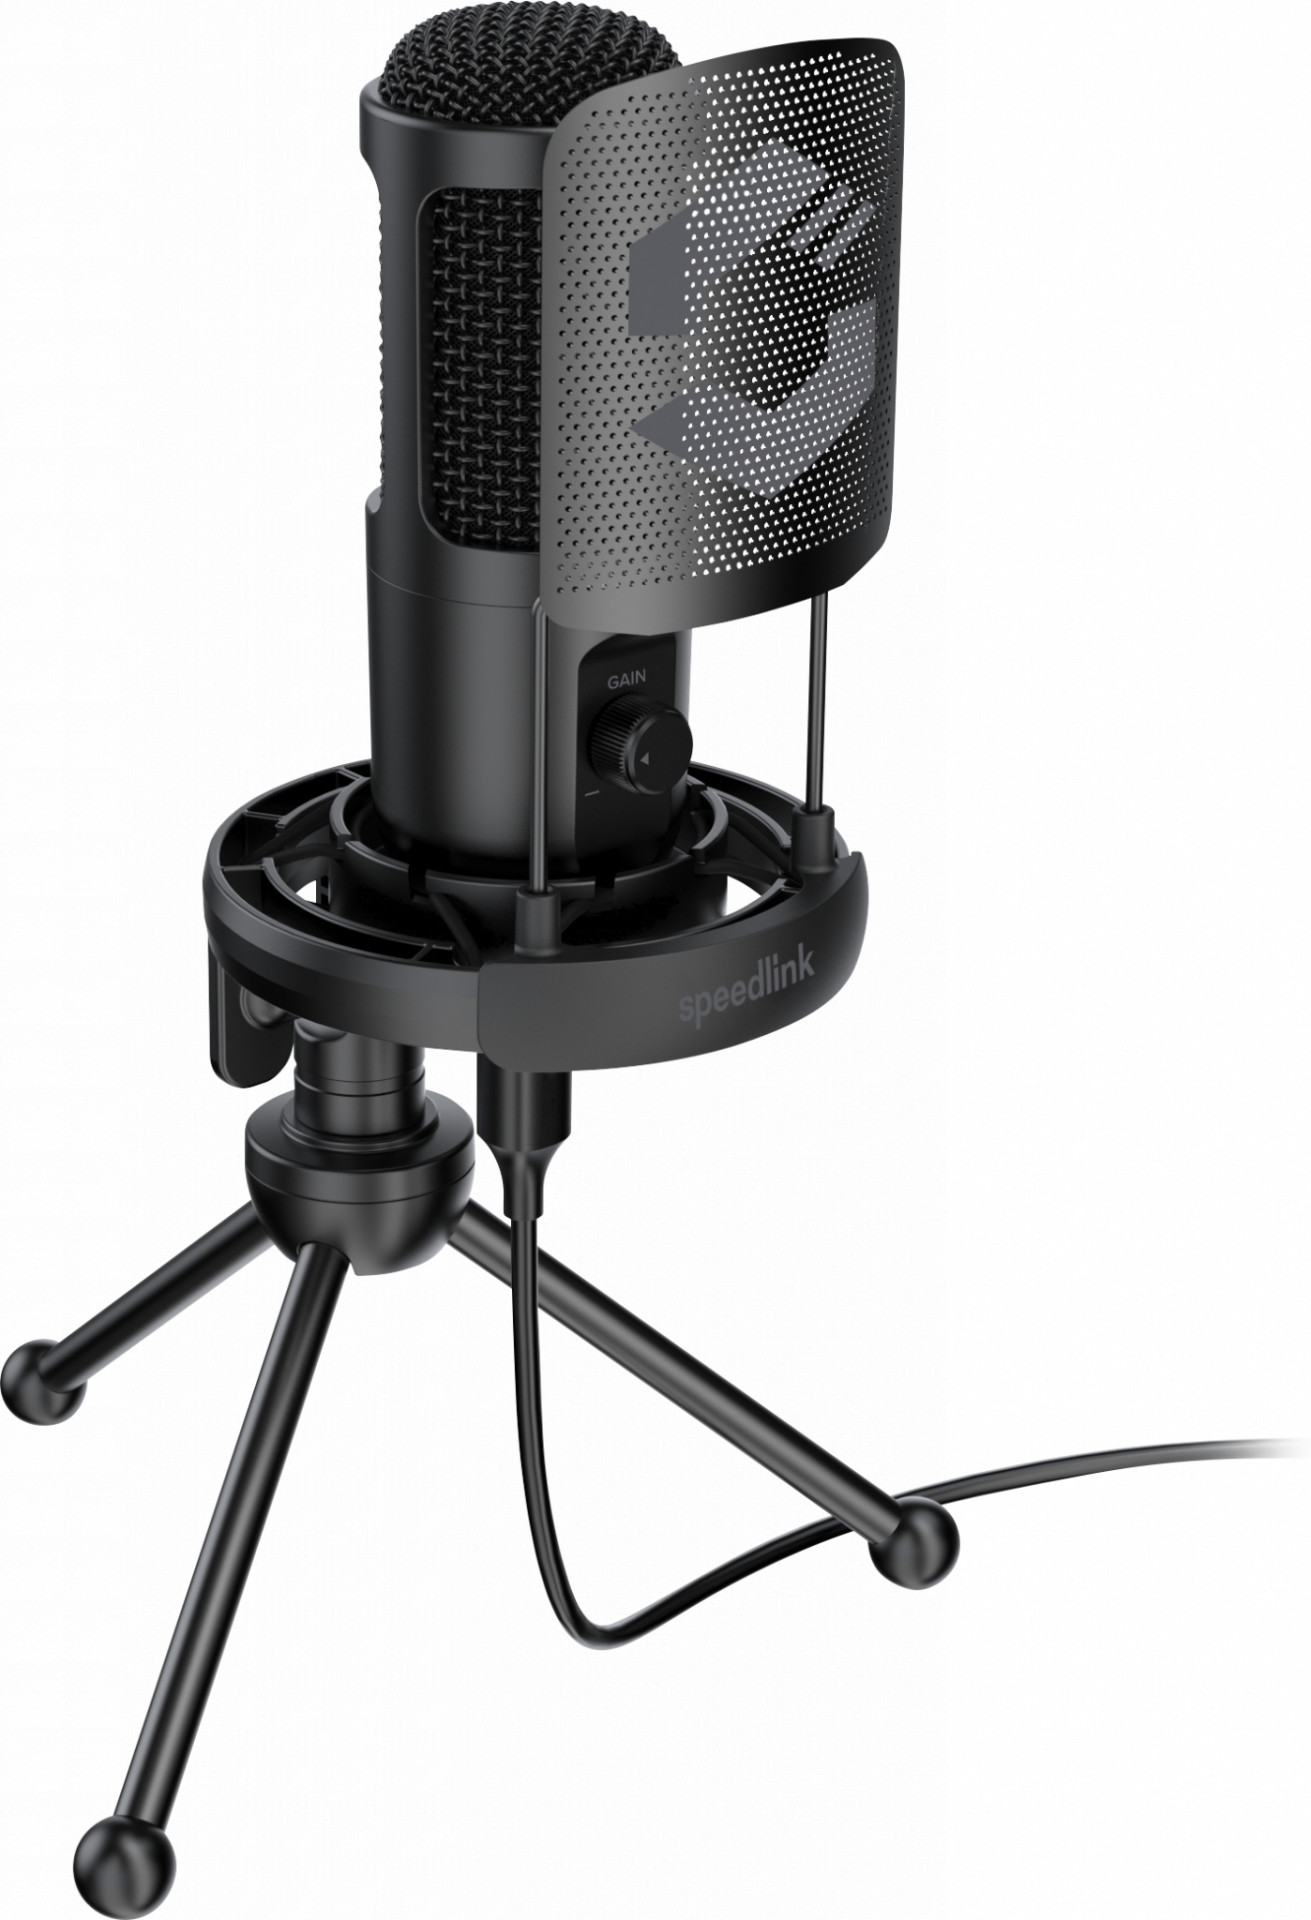 AUDIS PRO Streaming Microphone